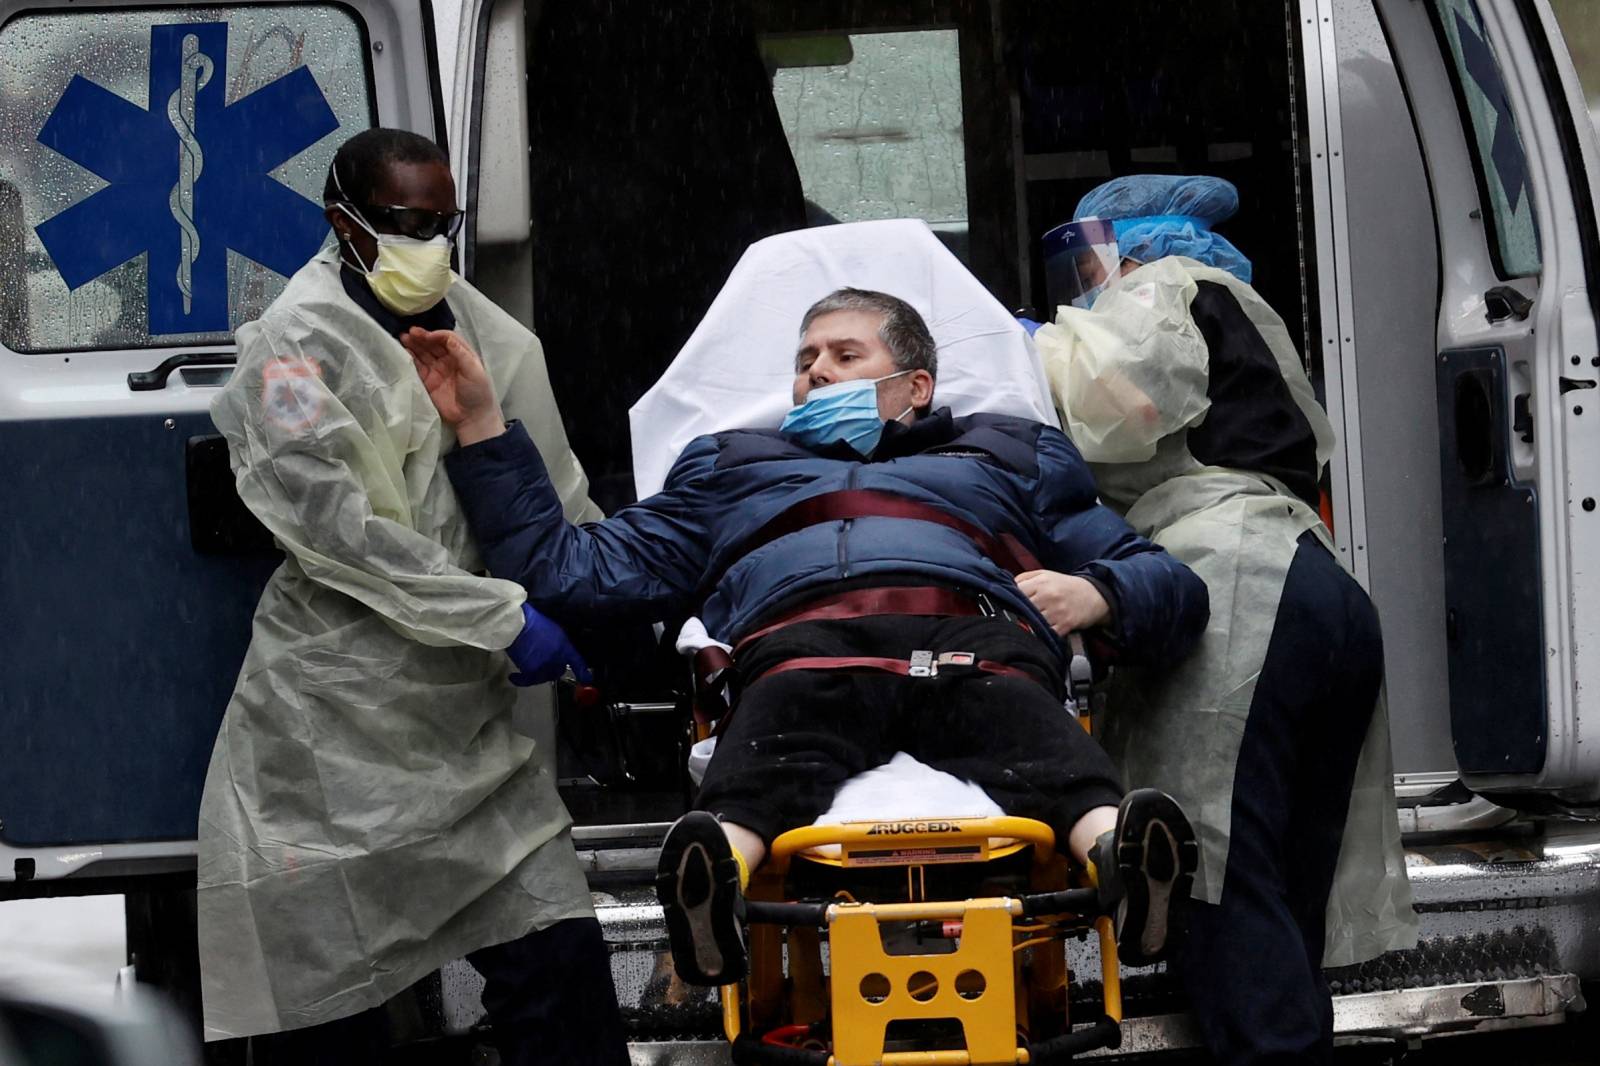 Patient is transported at Mount Sinai Hospital in Manhattan during outbreak of coronavirus disease (COVID-19) in New York